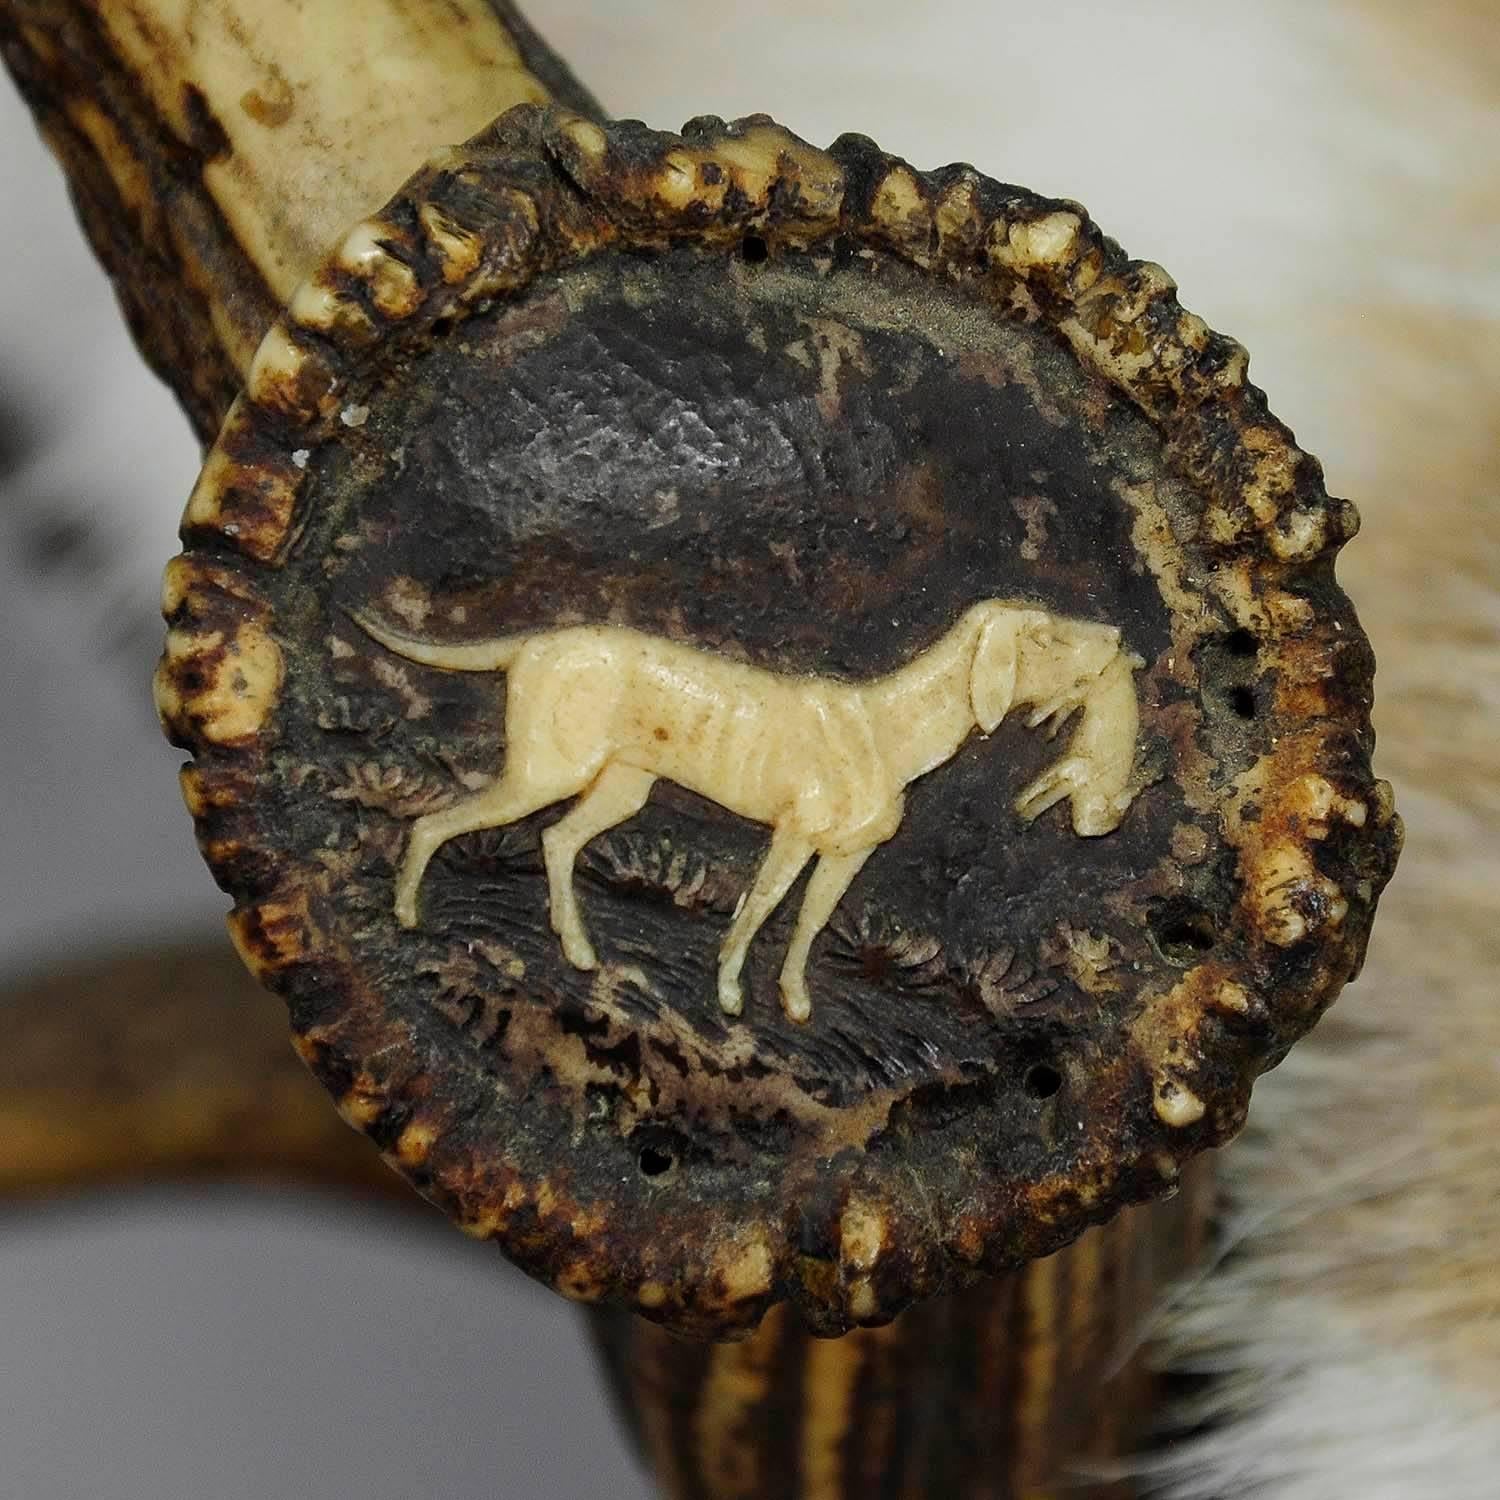 19th Century Antique Antler Stool with Fallow Deer Fur, Germany, circa 1870